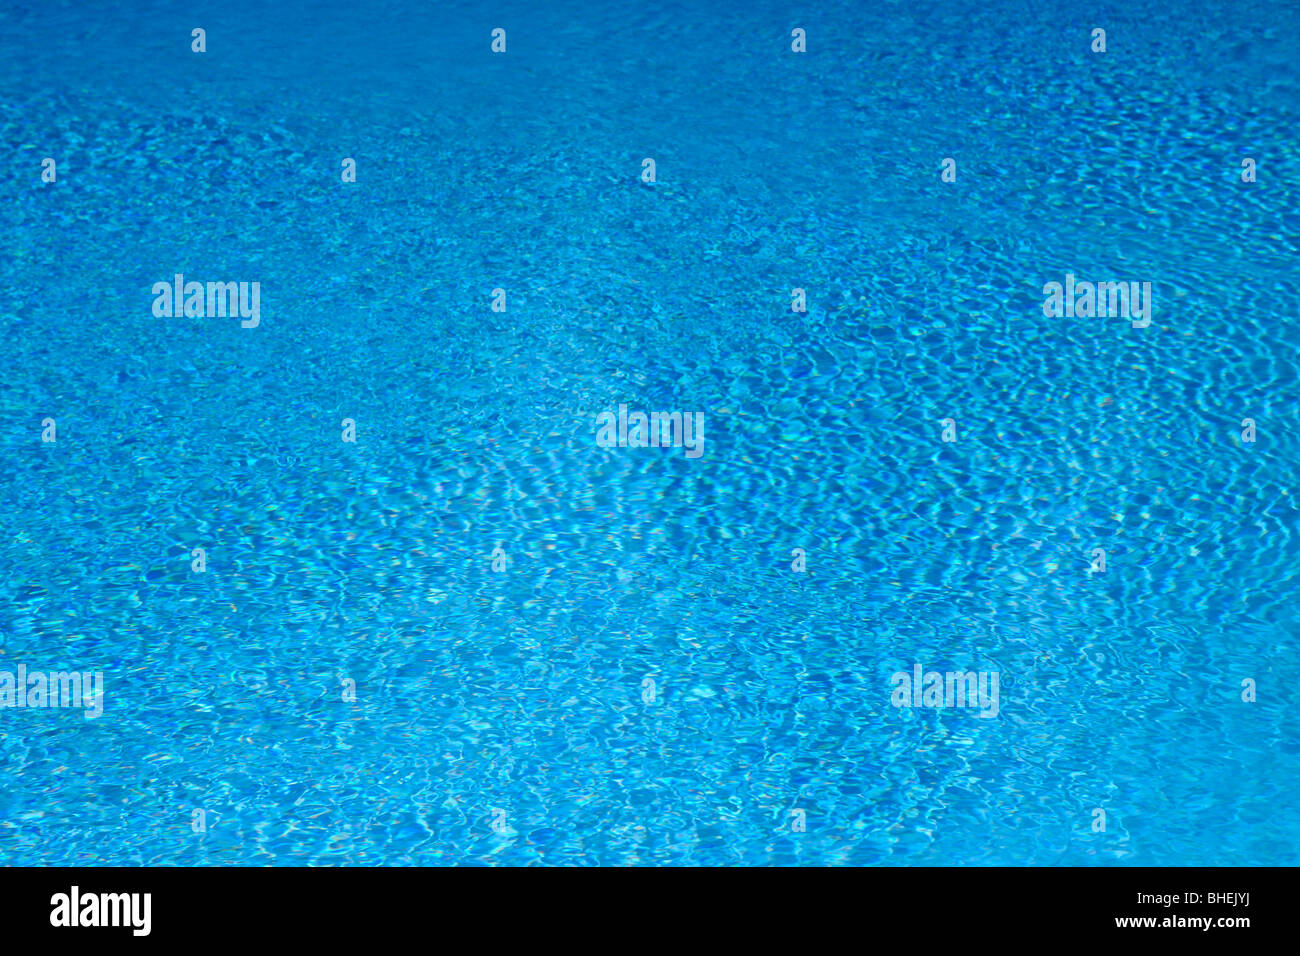 Blue water of a swimming pool Stock Photo